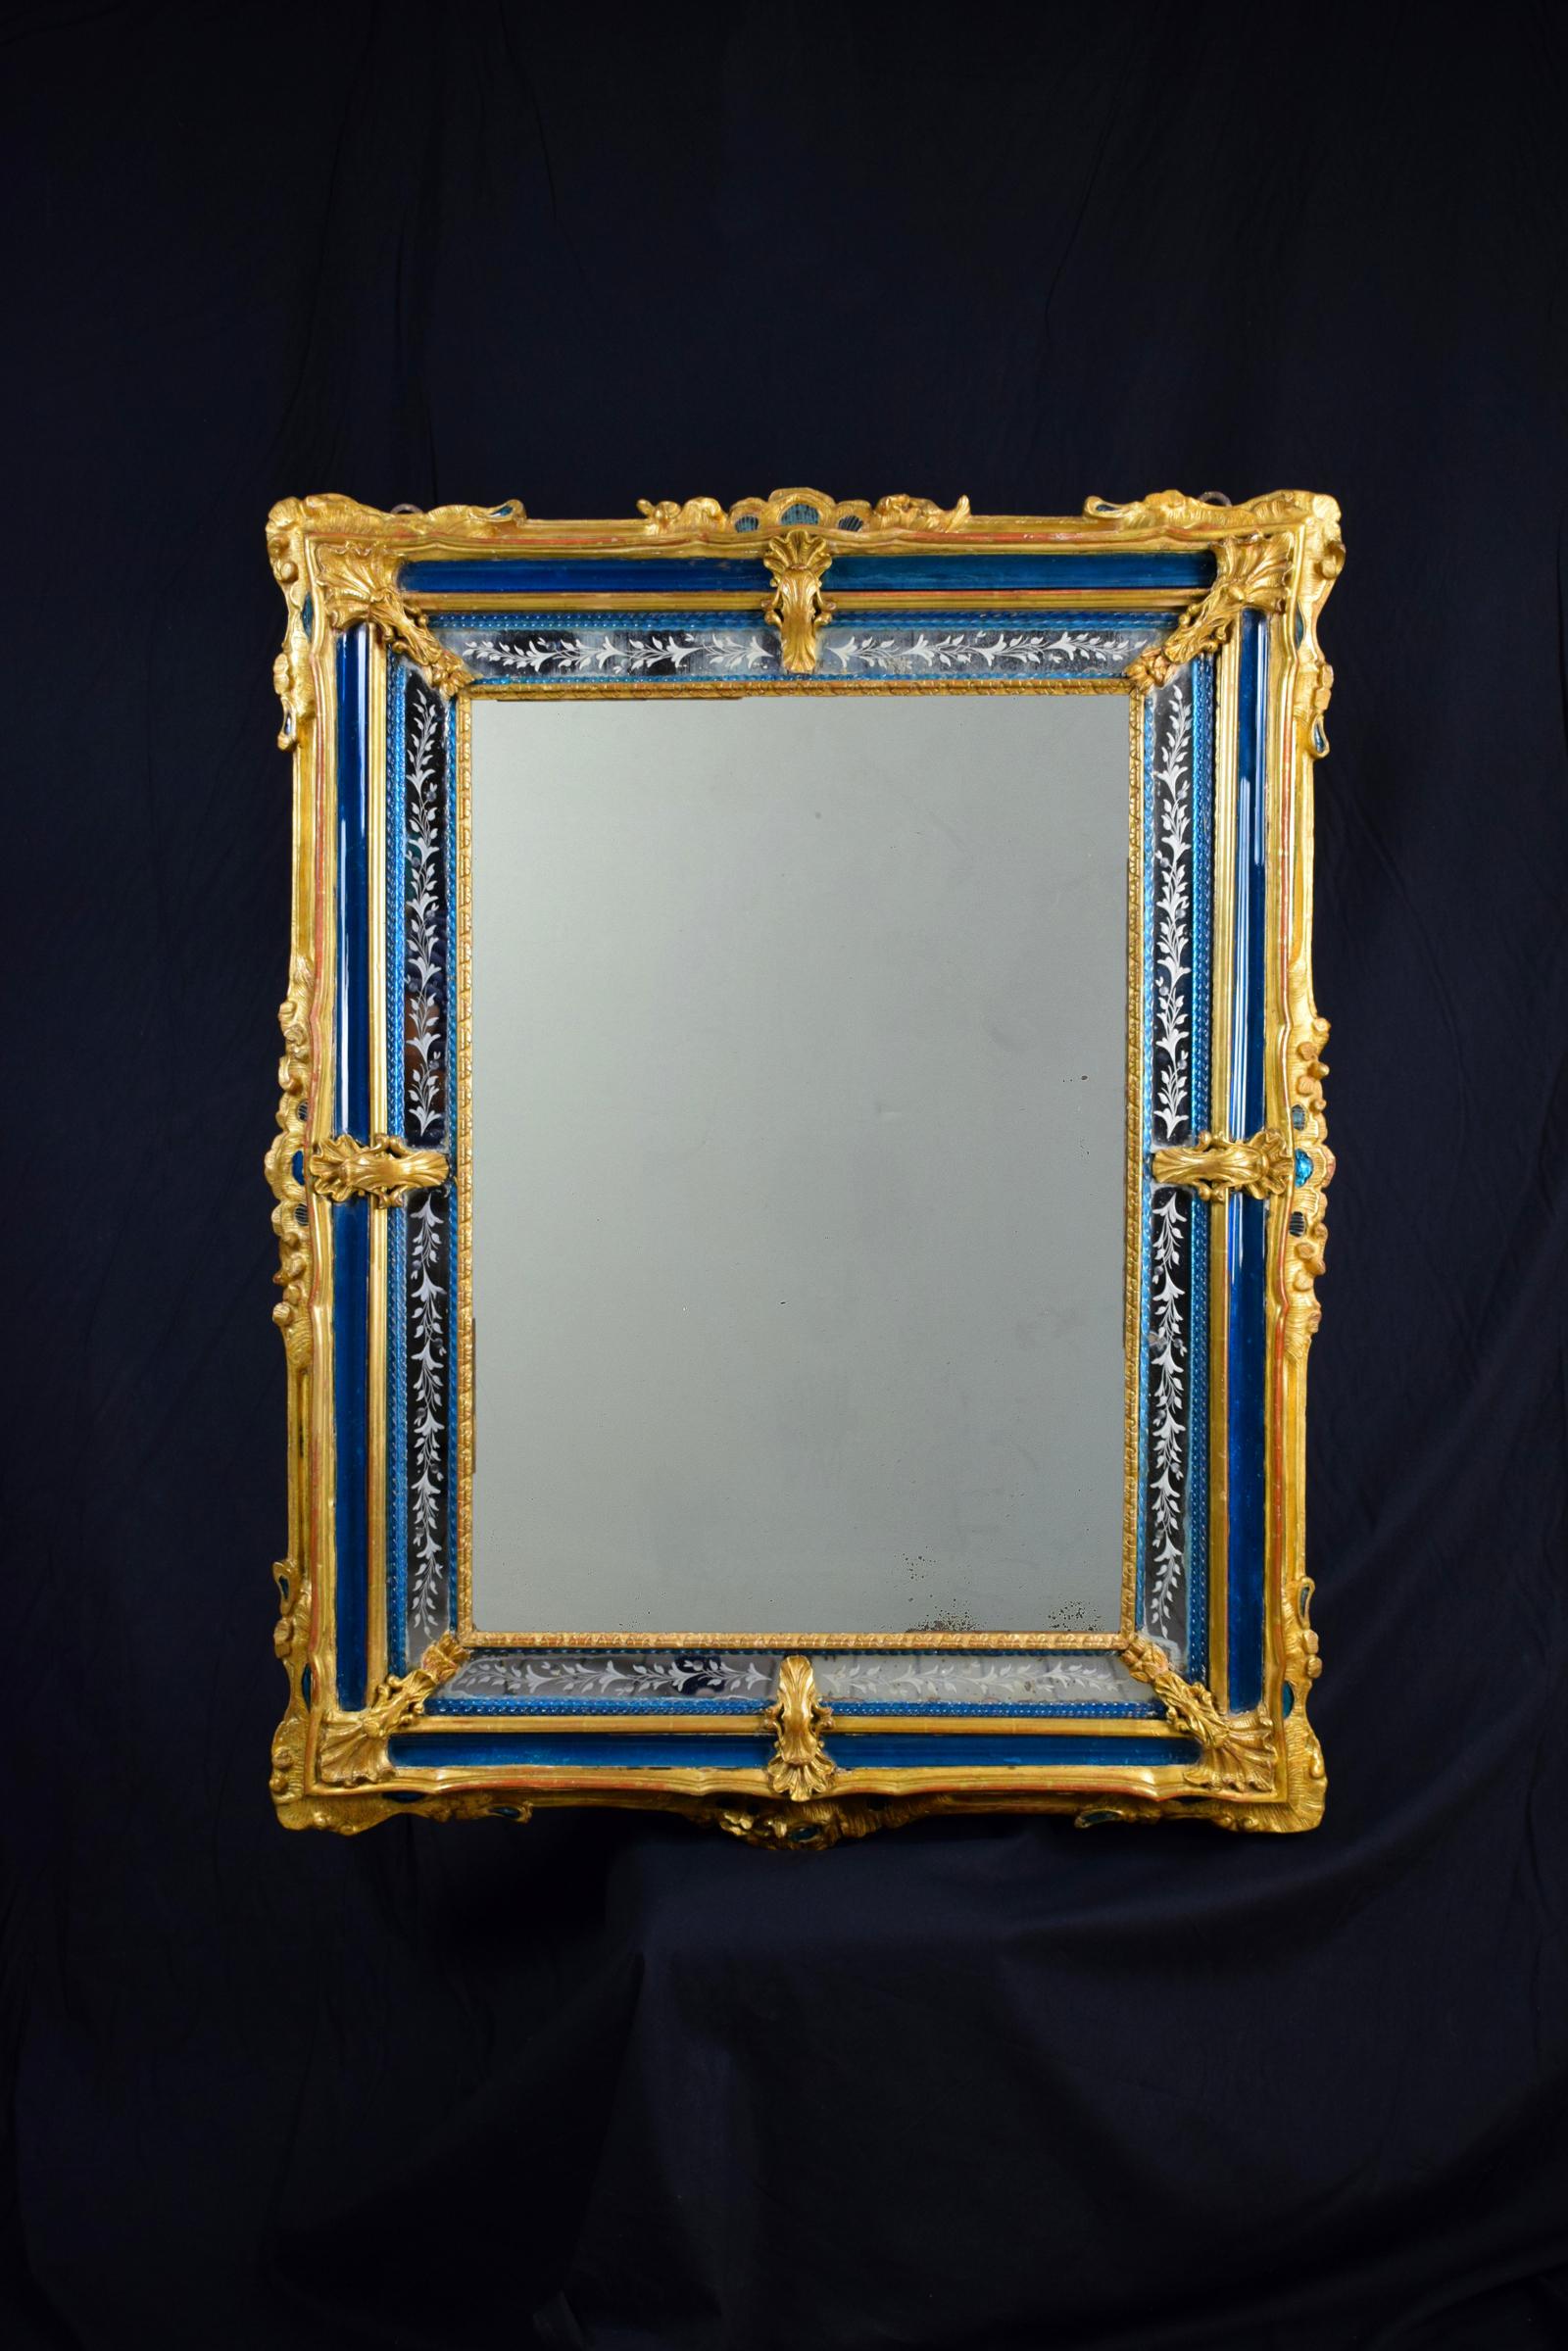 The rare and exquisite 18th century Venetian wall mirror is done of rectangular finely carved and gilded wood. It presents, on the corners, decorations with foliate motif. In the inner borders are included some original blue Murano’s glass paste